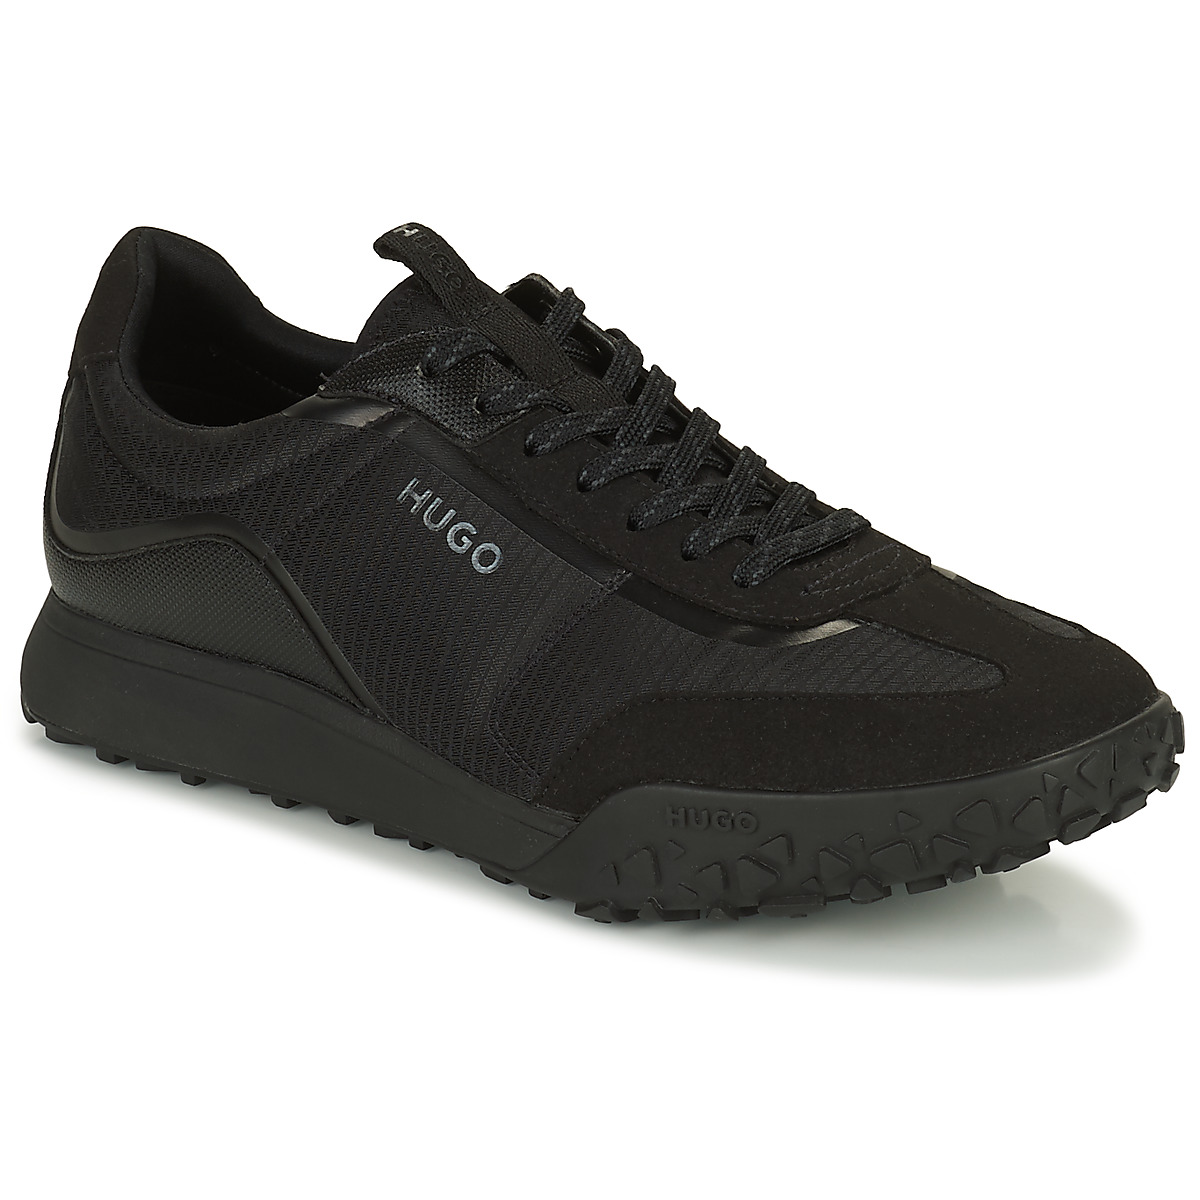 Hugo Boss Mens Trainers SALE • Up to 50% discount